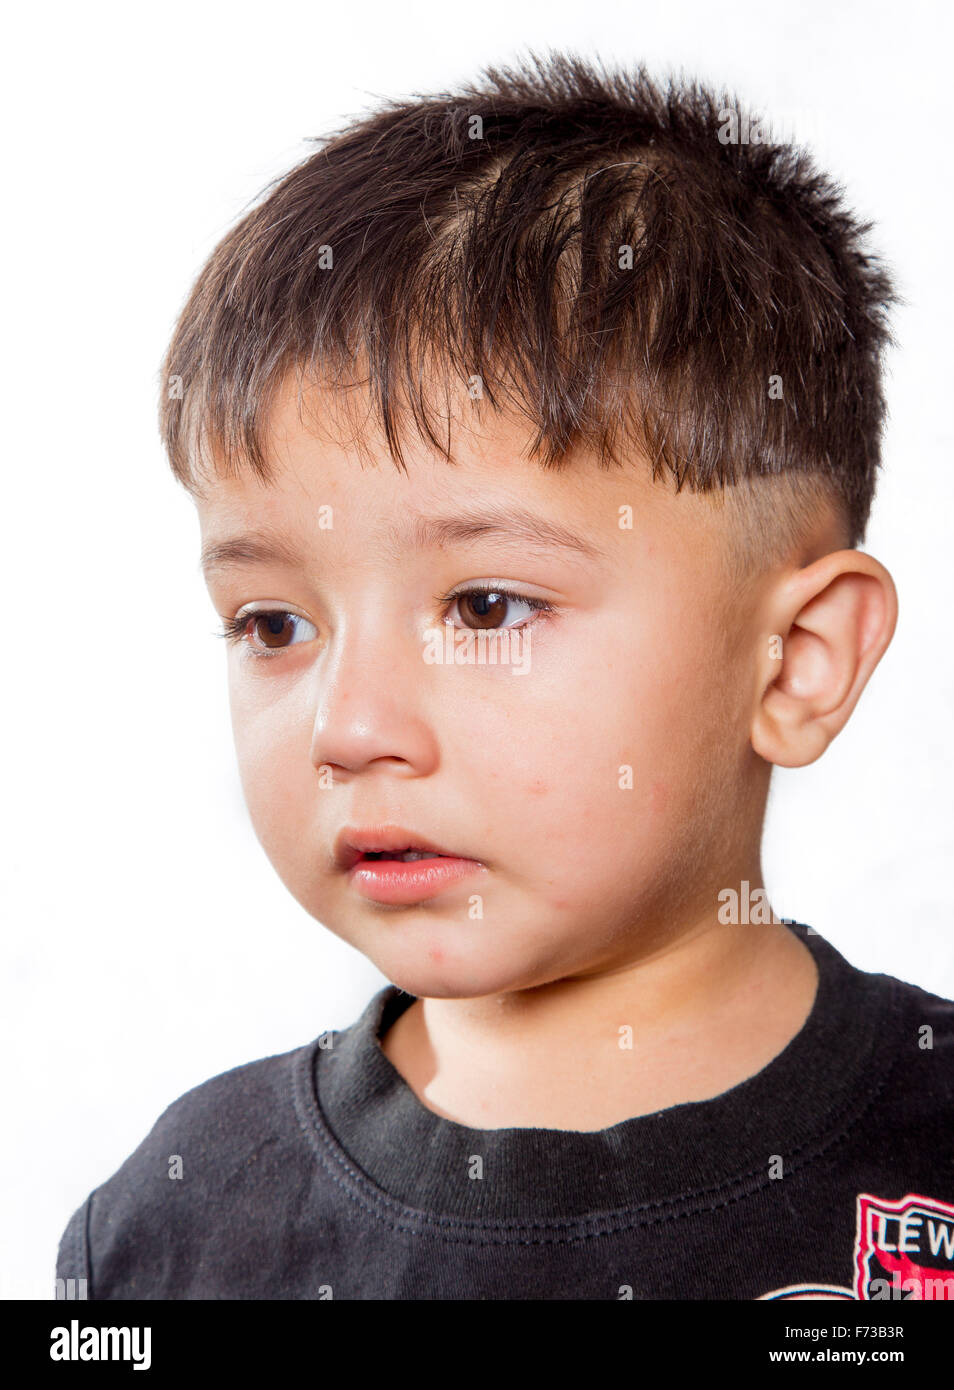 Portrait of Small Boy urban background with modern haircut Stock Photo -  Alamy